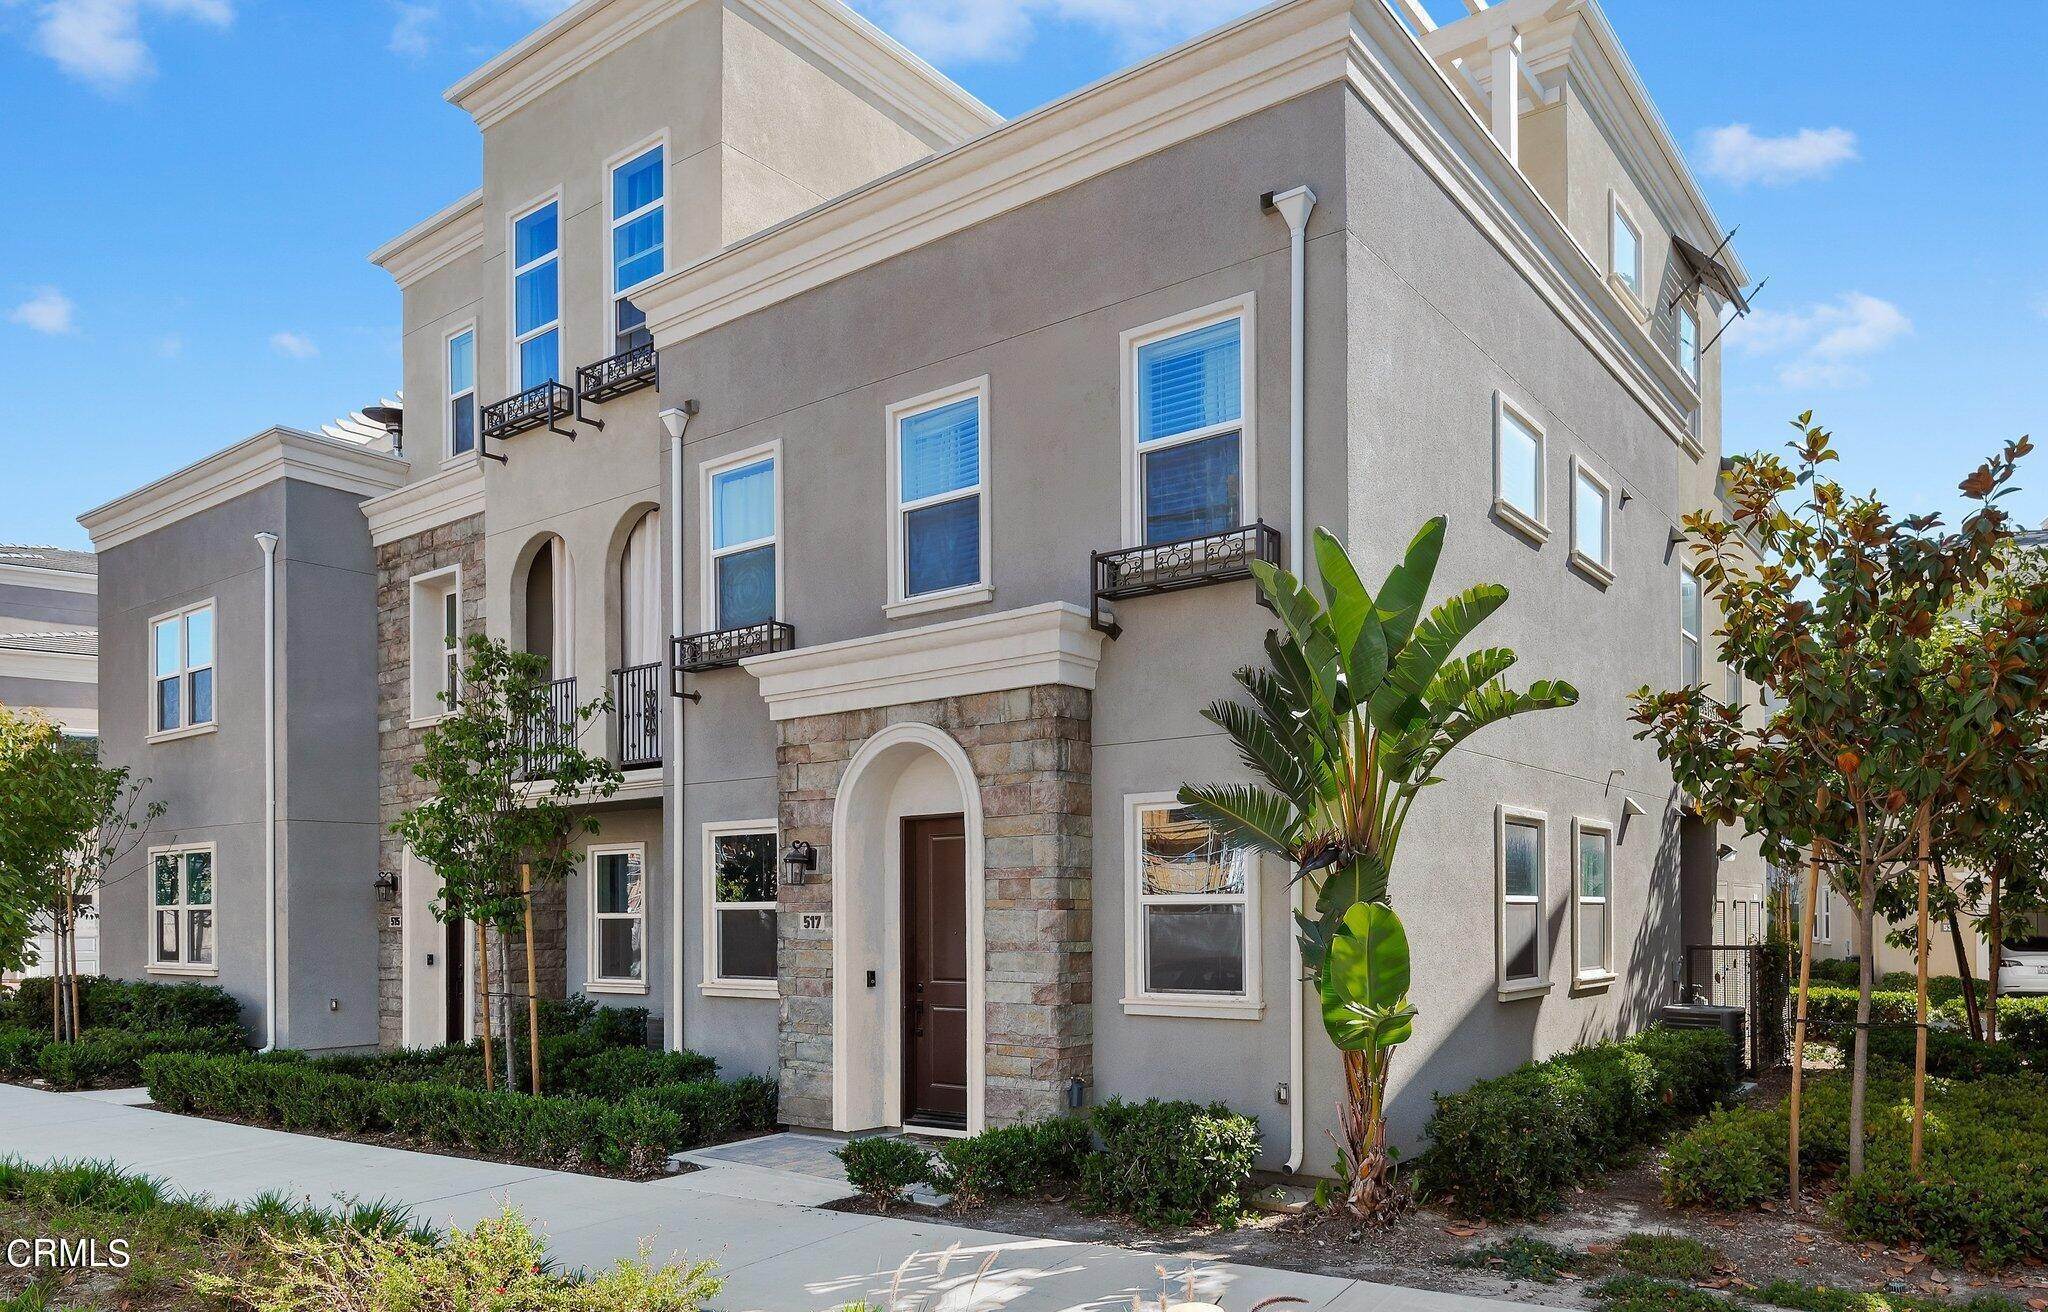 Townhouse at 517 Winchester Drive Oxnard, California 93036 United States